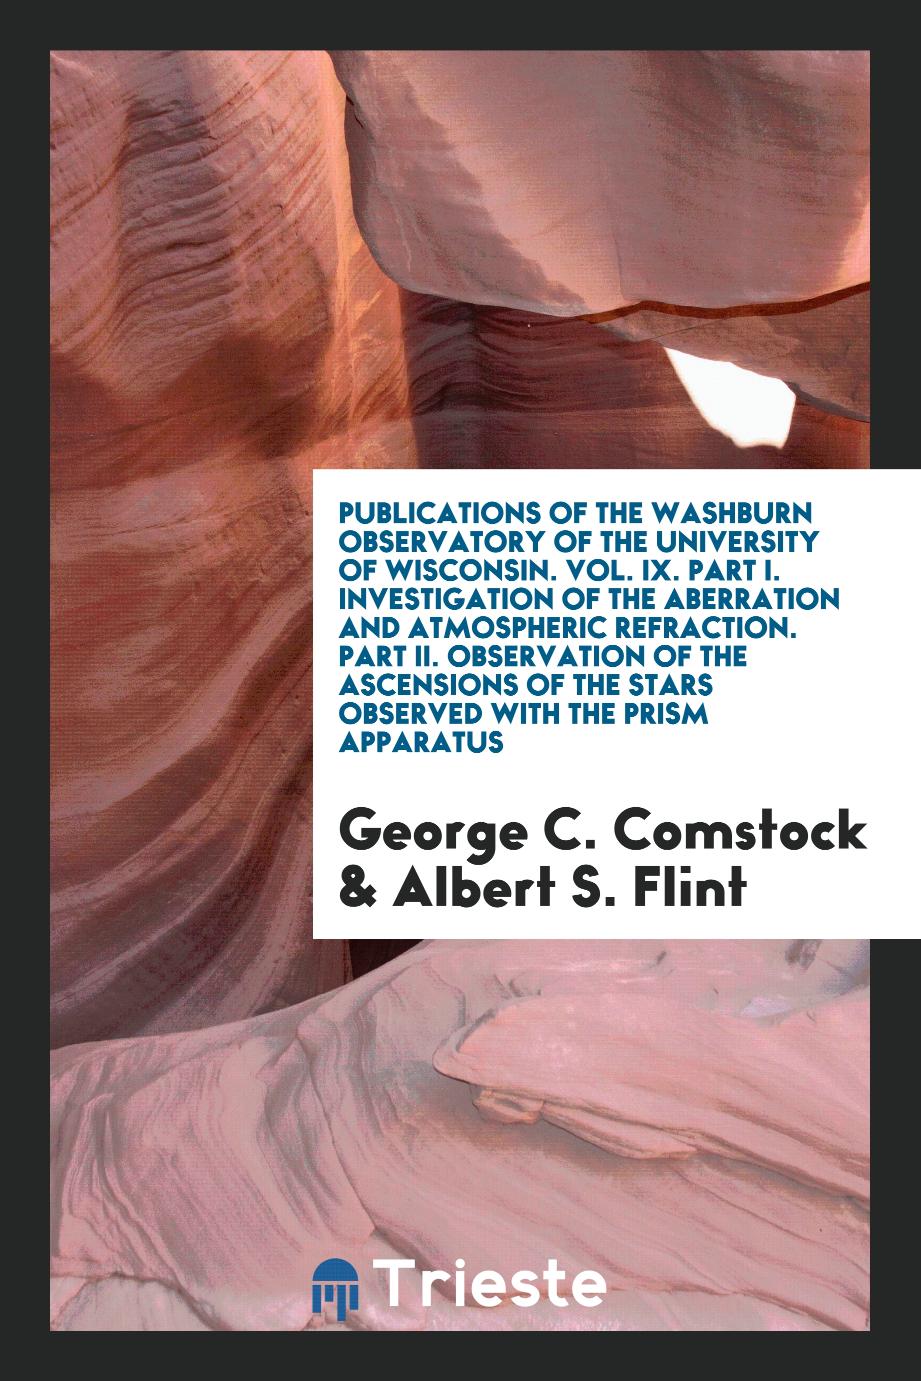 Publications of the Washburn Observatory of the University of Wisconsin. Vol. IX. Part I. Investigation of the Aberration and Atmospheric Refraction. Part II. Observation of the Ascensions of the Stars Observed with the Prism Apparatus